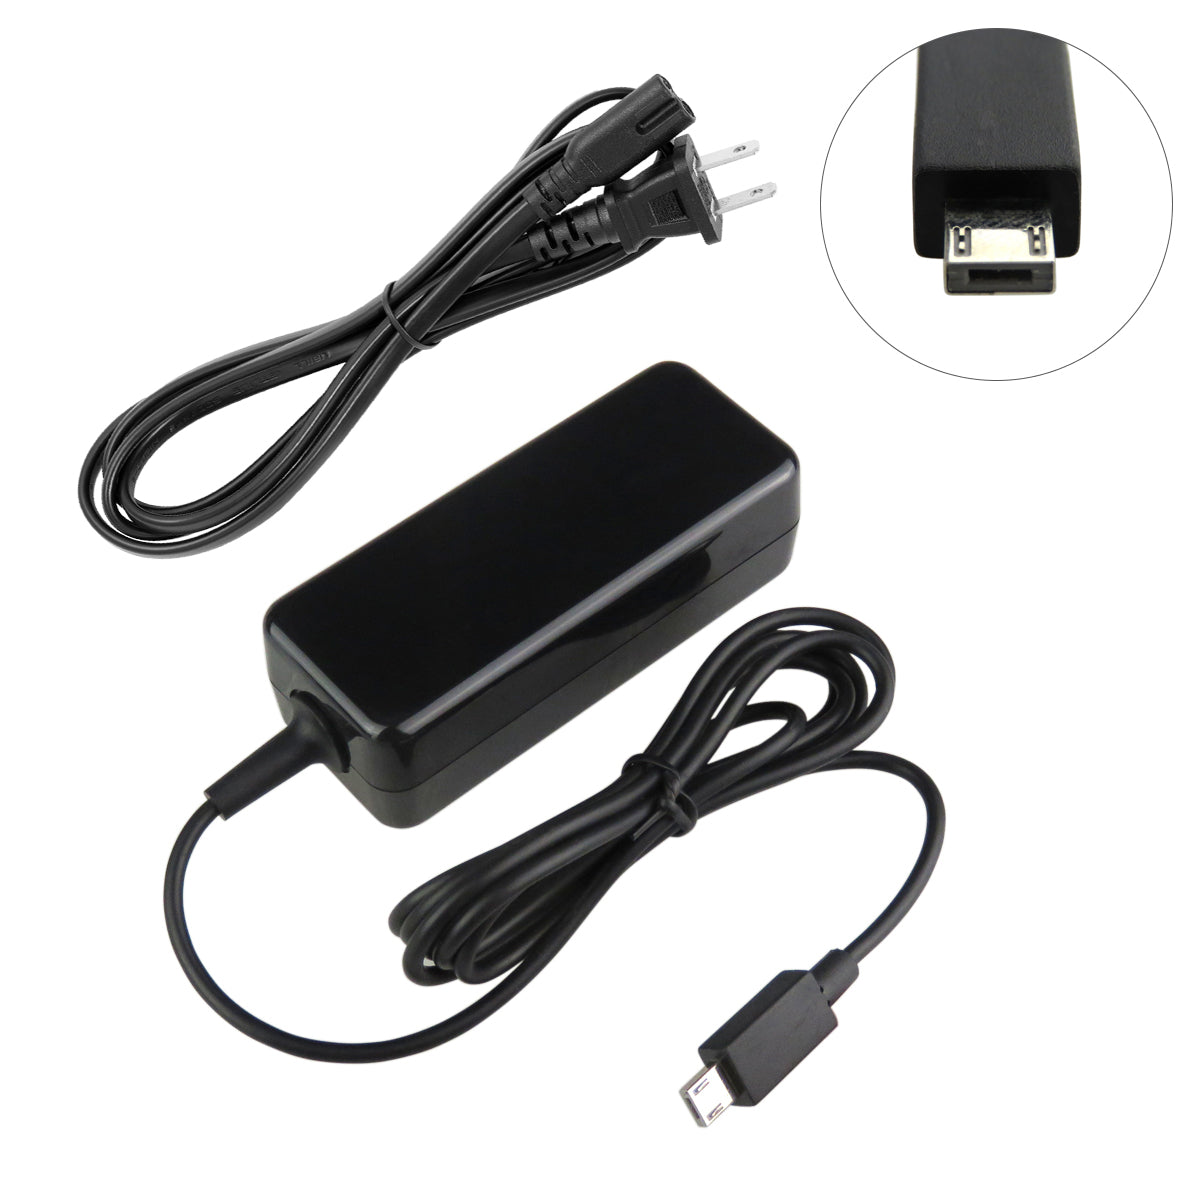 Charger for ASUS EeeBook X205TA-DS01 Laptop.